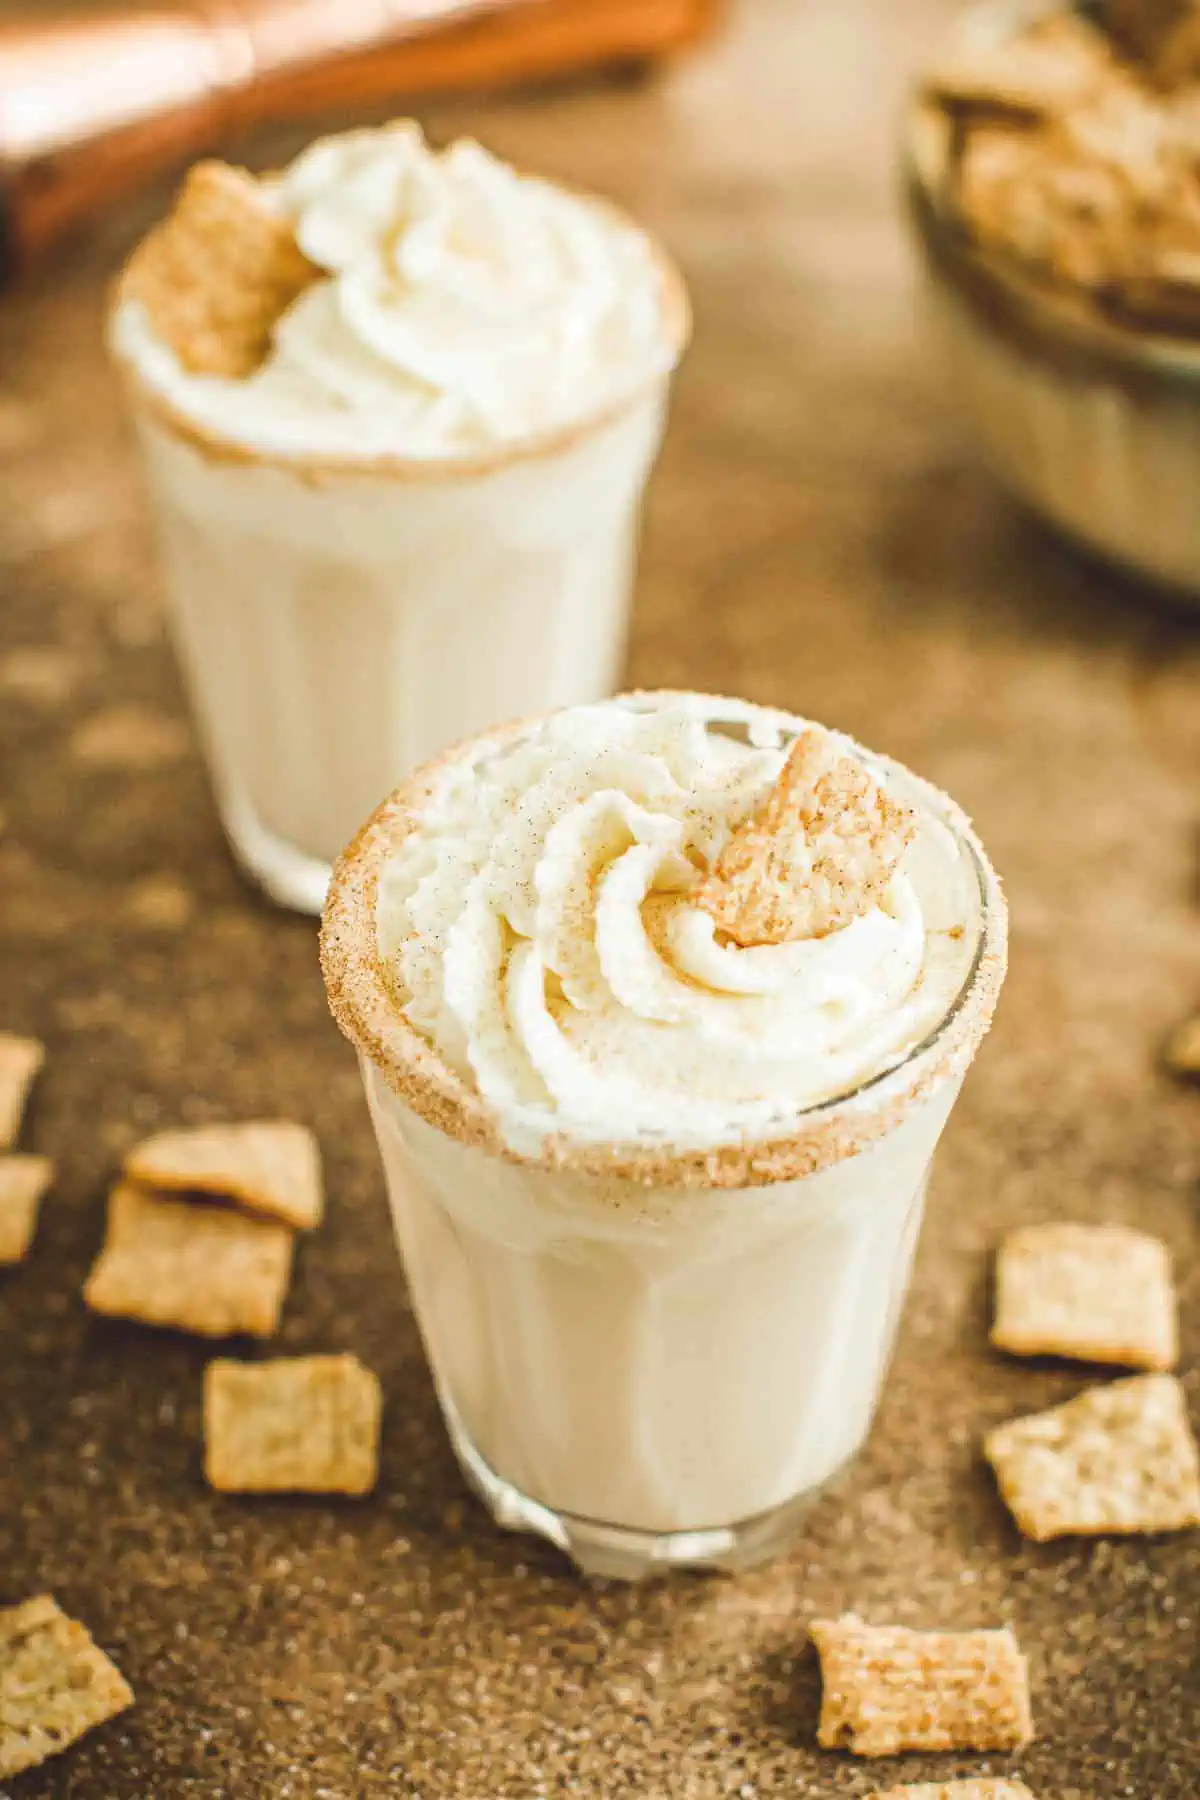 Cinnamon toast crunch shot topped with whipped cream.